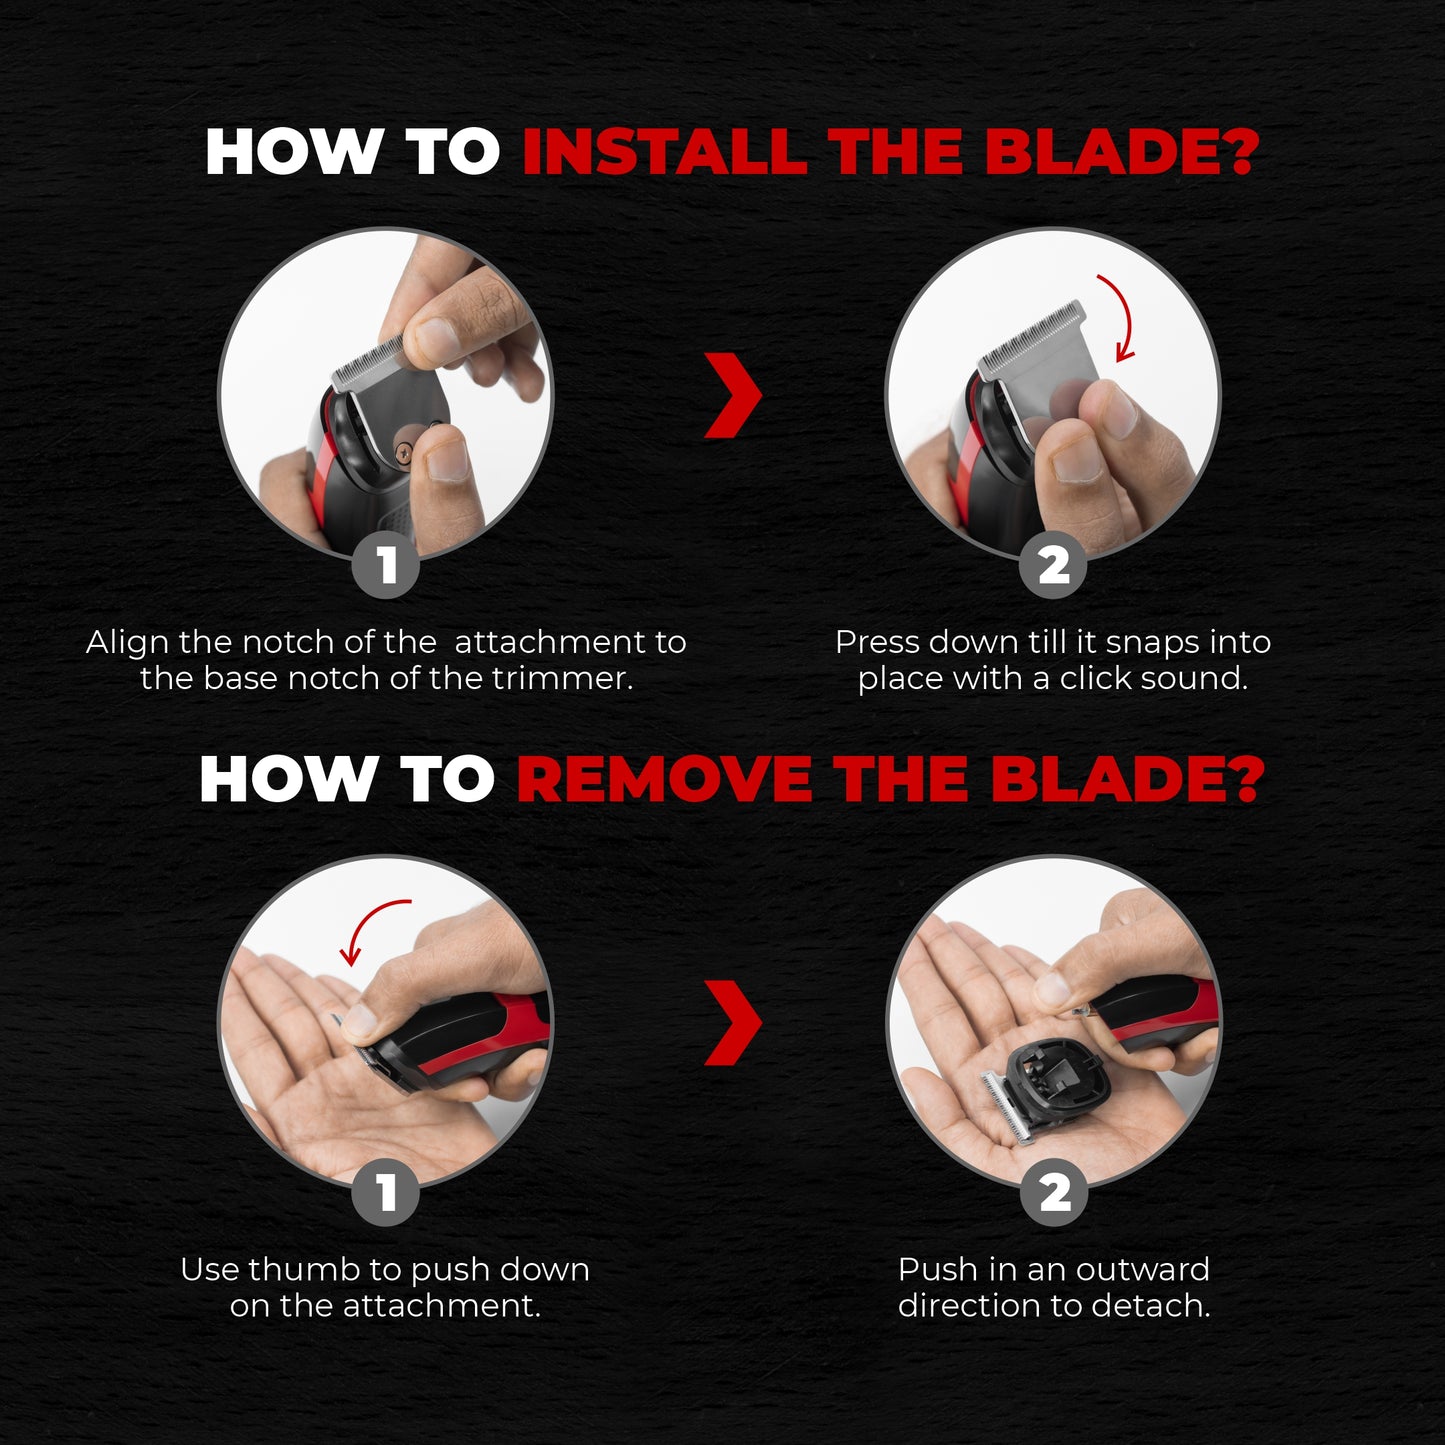 How to install the blade